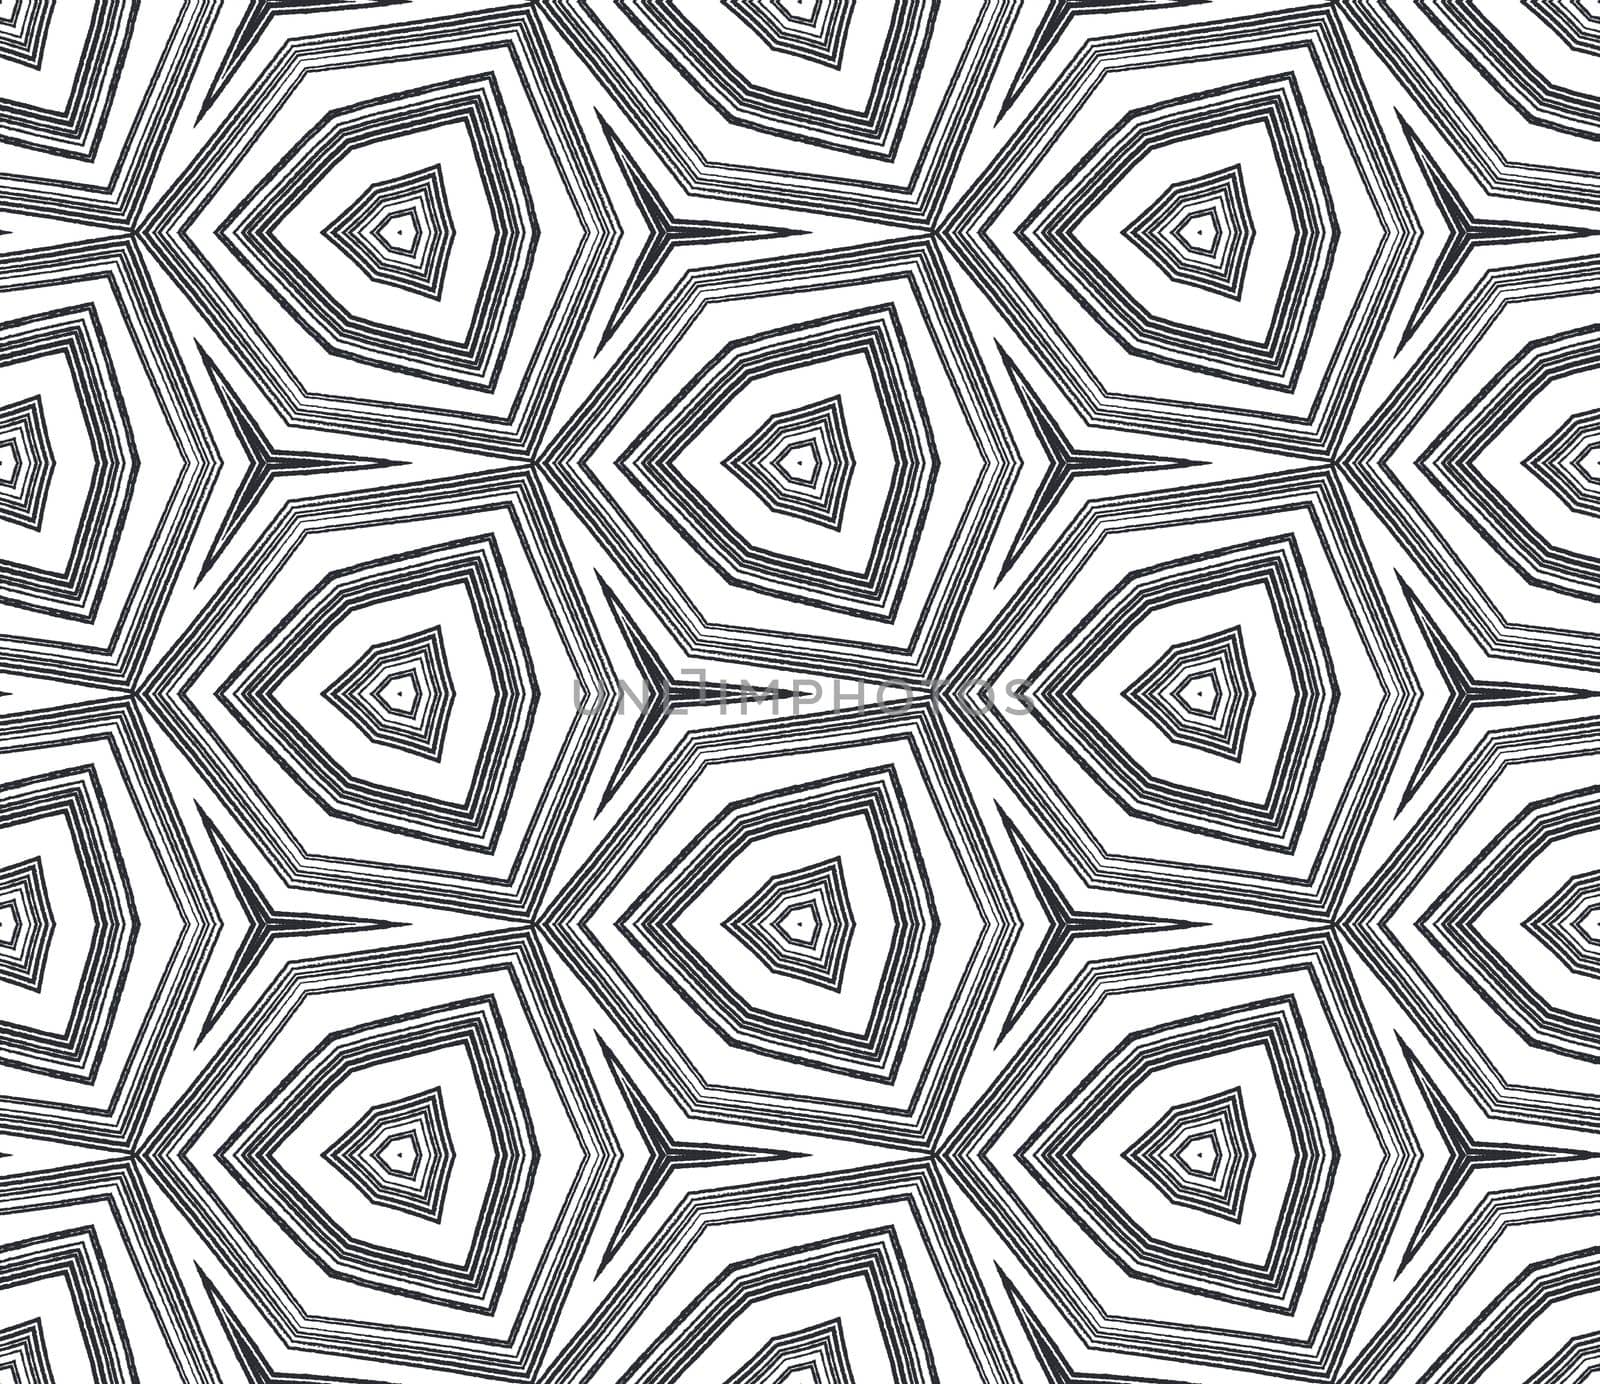 Striped hand drawn pattern. Black symmetrical kaleidoscope background. Repeating striped hand drawn tile. Textile ready memorable print, swimwear fabric, wallpaper, wrapping.